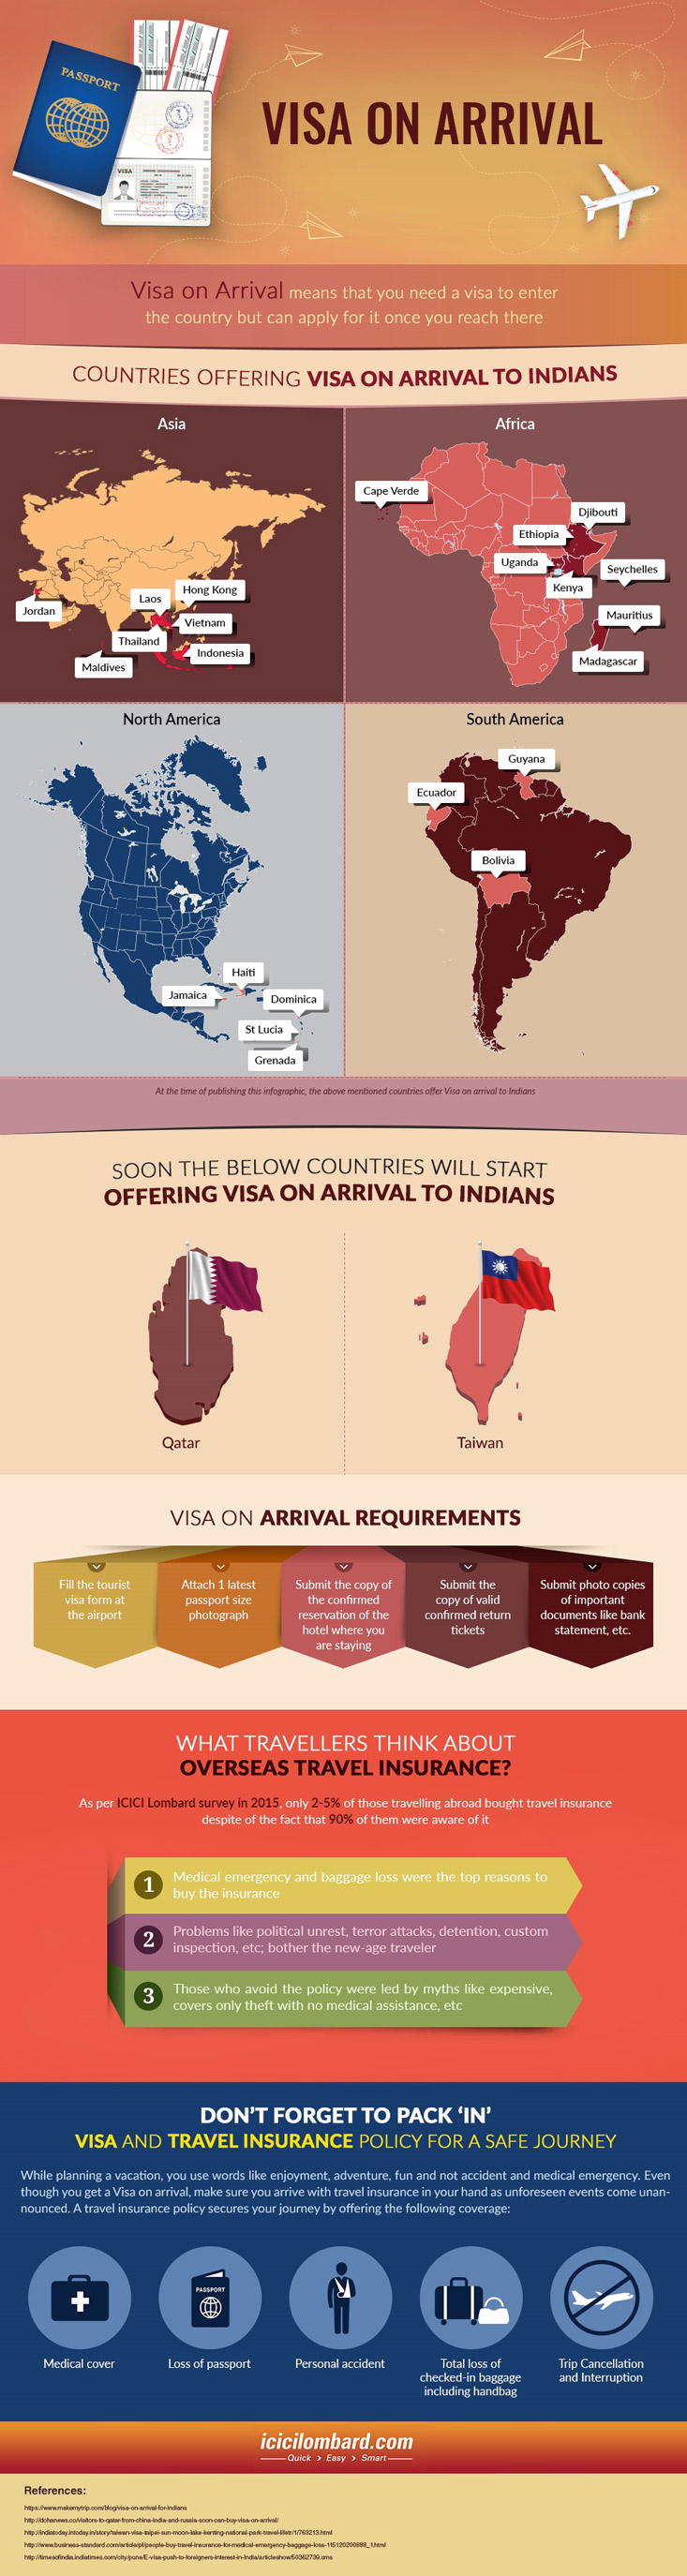 Countries offering visa on arrival to Indians